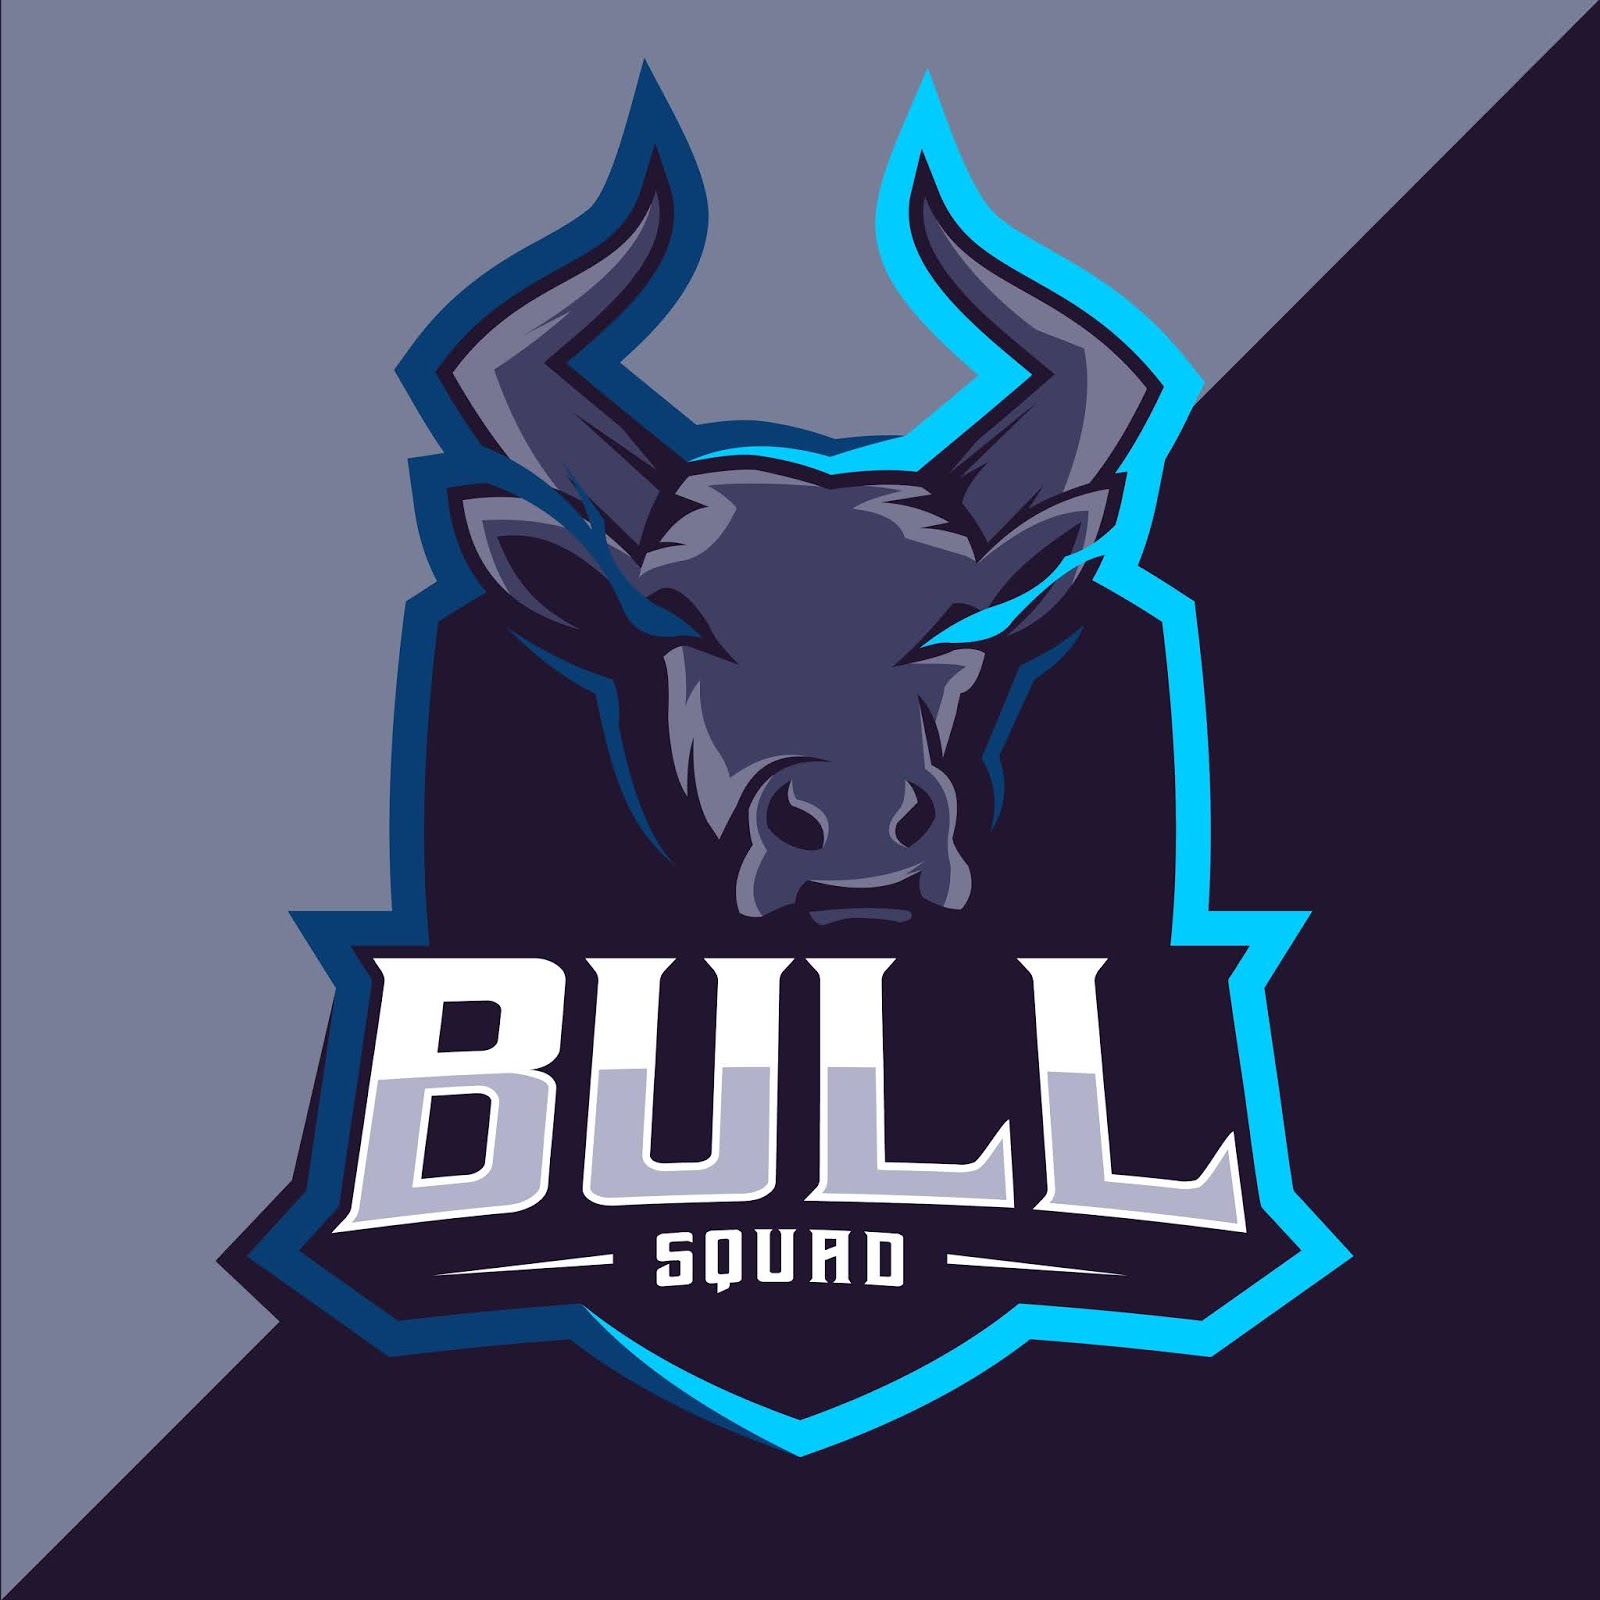 Bull Mascot Esport Logo Style Free Download Vector CDR, AI, EPS and PNG Formats